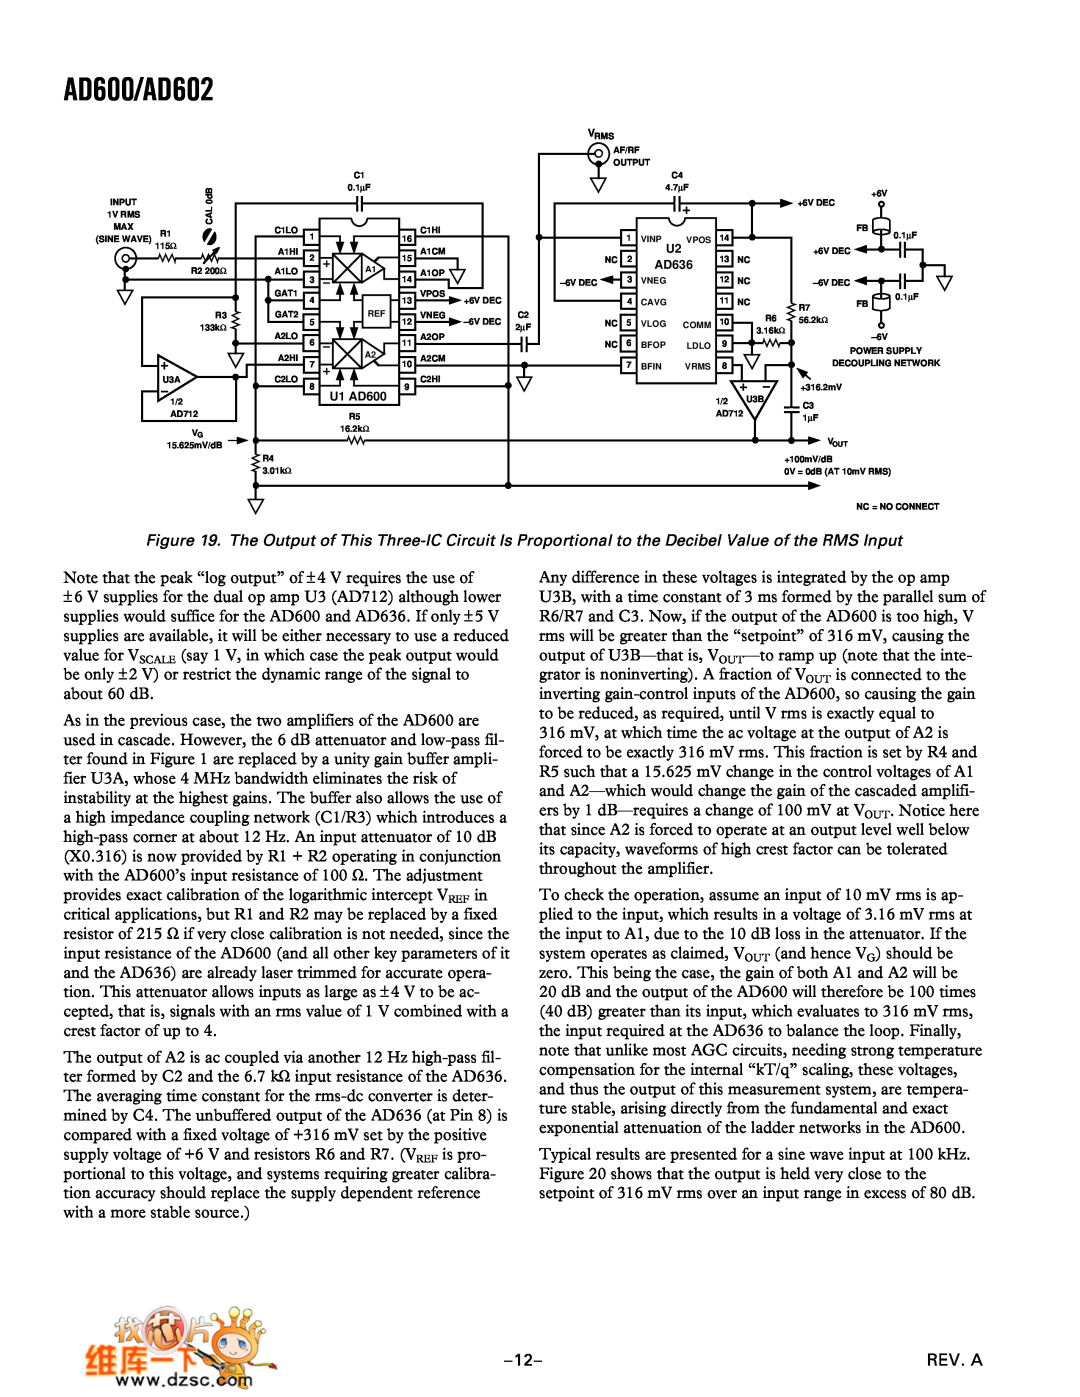 Analog Devices manual AD600/AD602, about 60 dB 